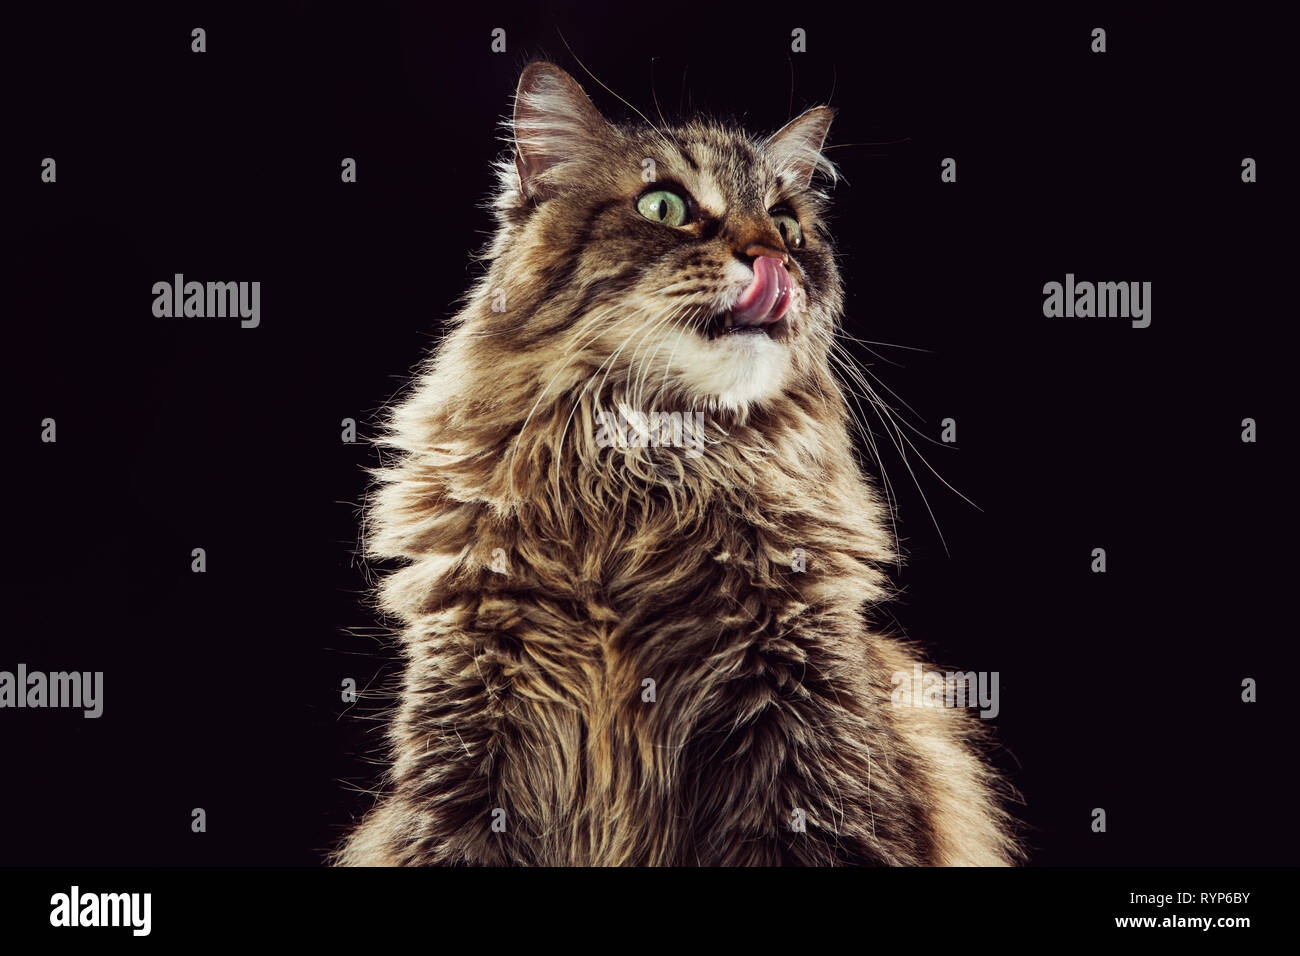 Studio portrait of a brown tabby cat looking off camera with a suprised expression and tongue reaching up to nose. Stock Photo